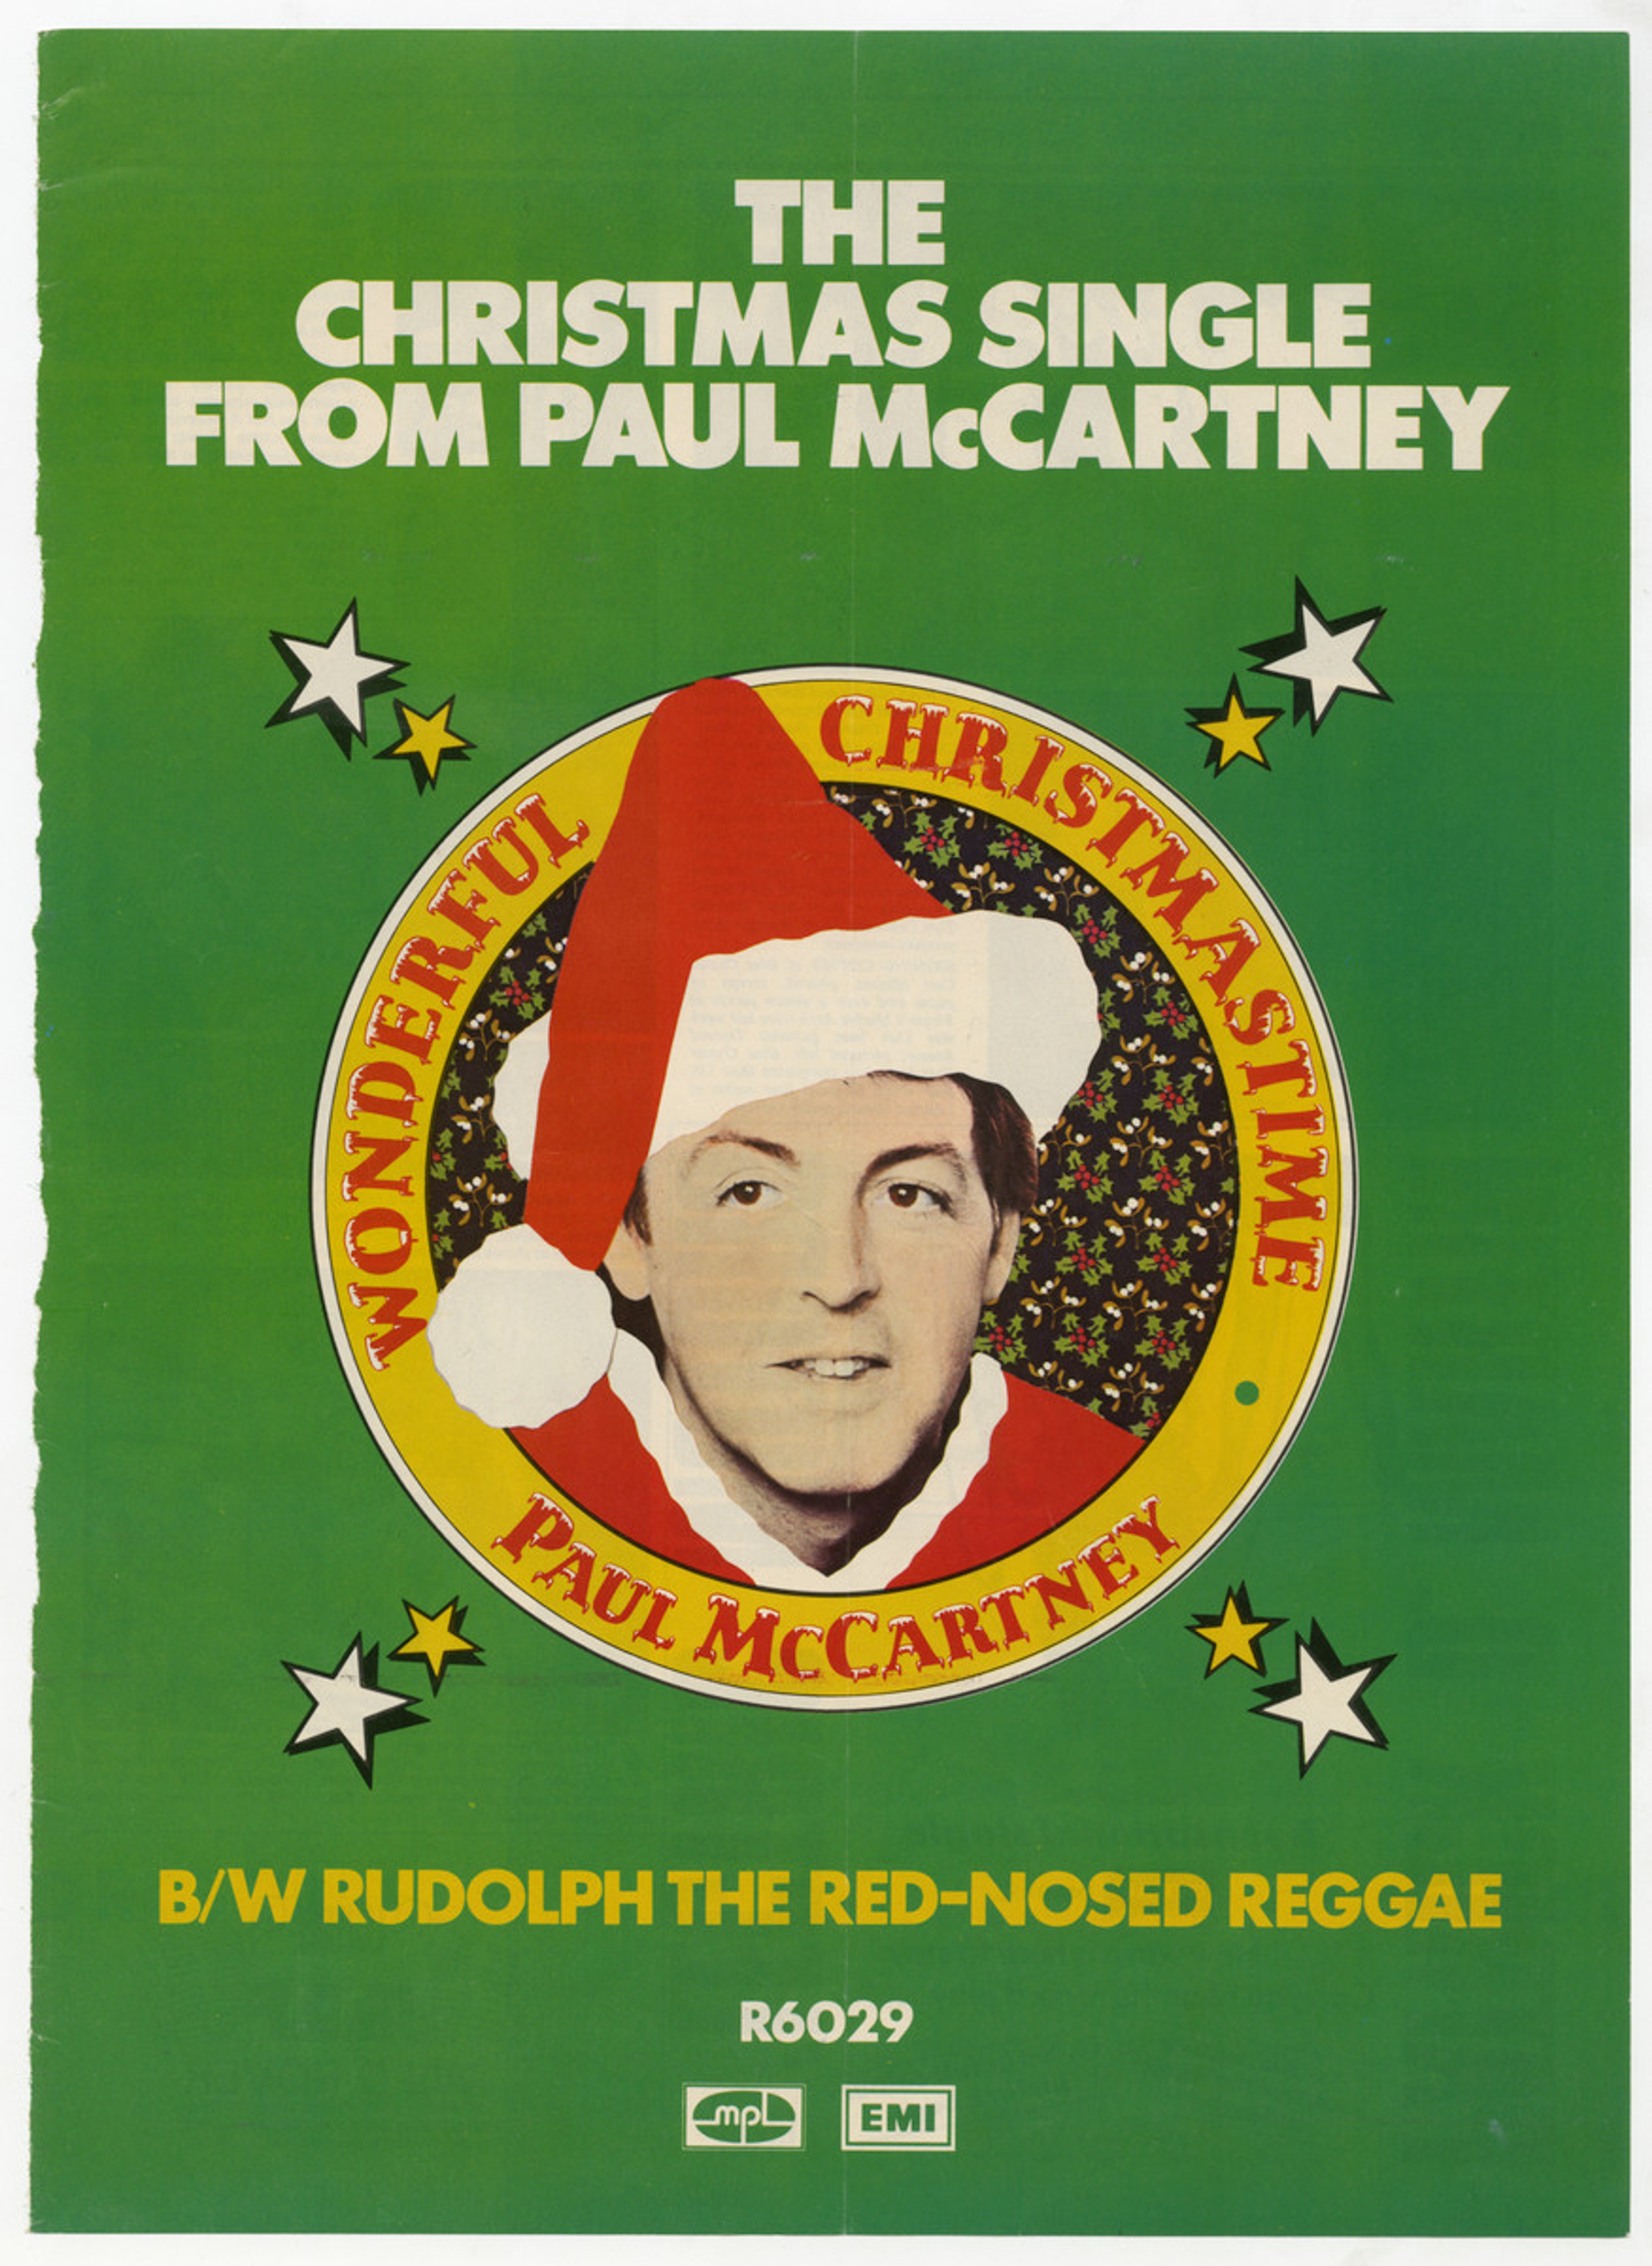 Green poster featuring Paul wearing a Santa hat